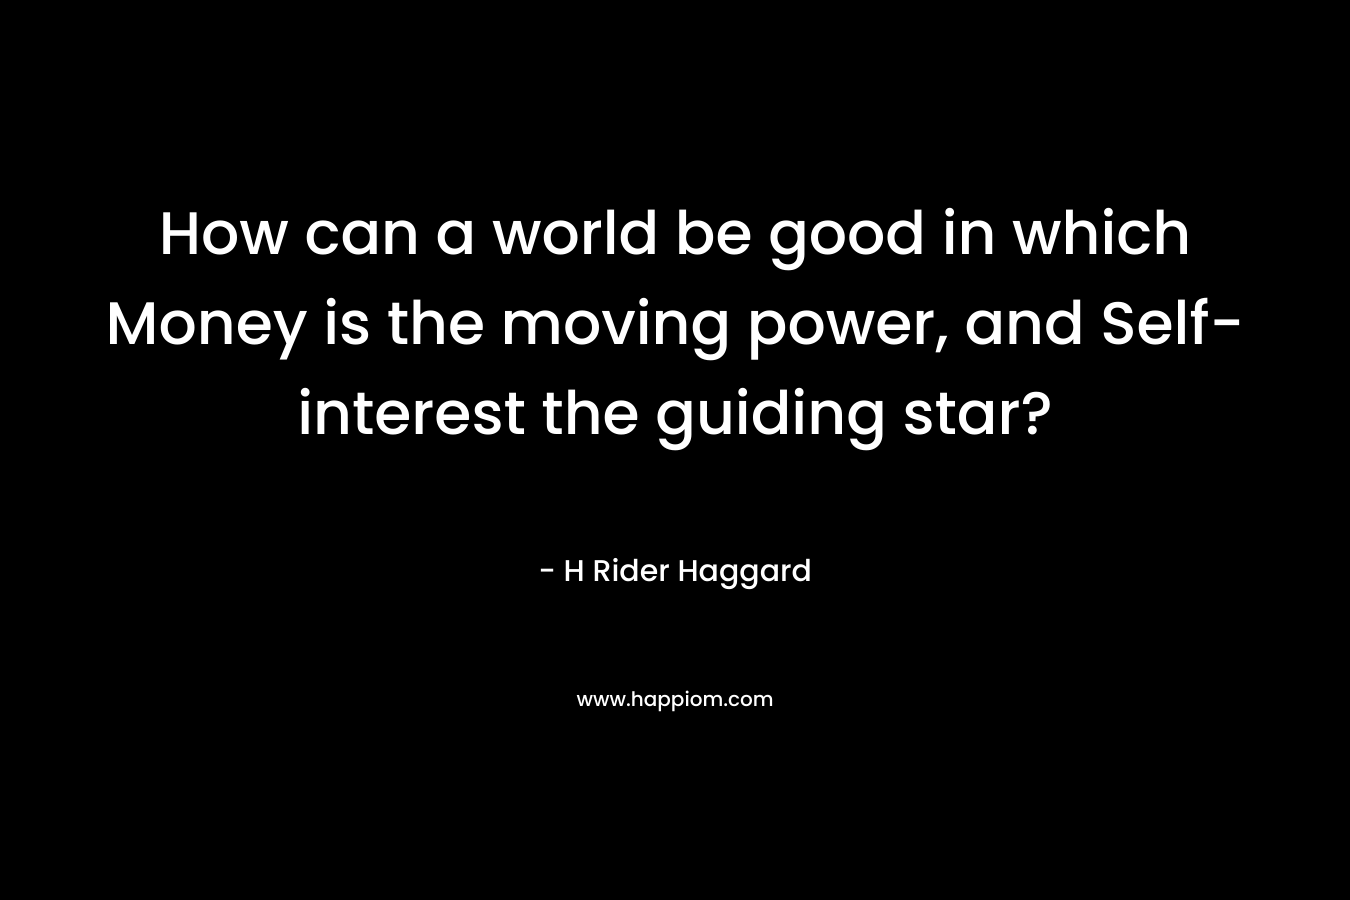 How can a world be good in which Money is the moving power, and Self-interest the guiding star? – H Rider Haggard